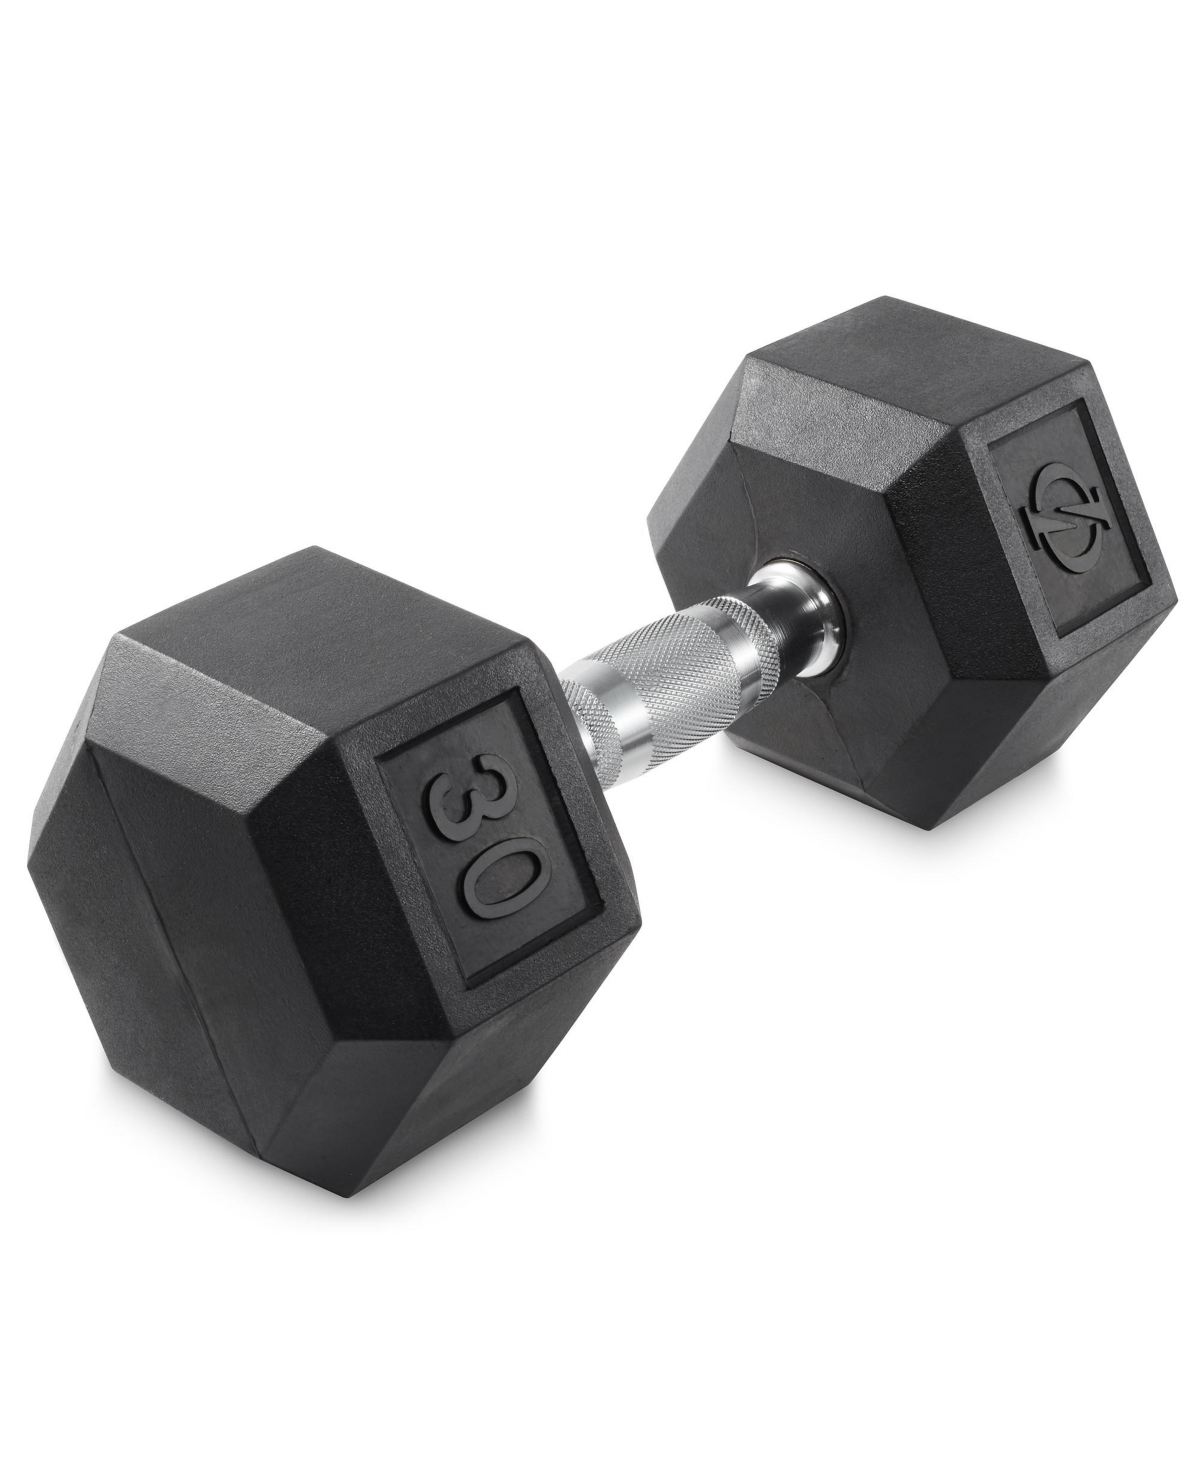 Rubber Coated Hex Dumbbell Hand Weight, 30 lbs - Black